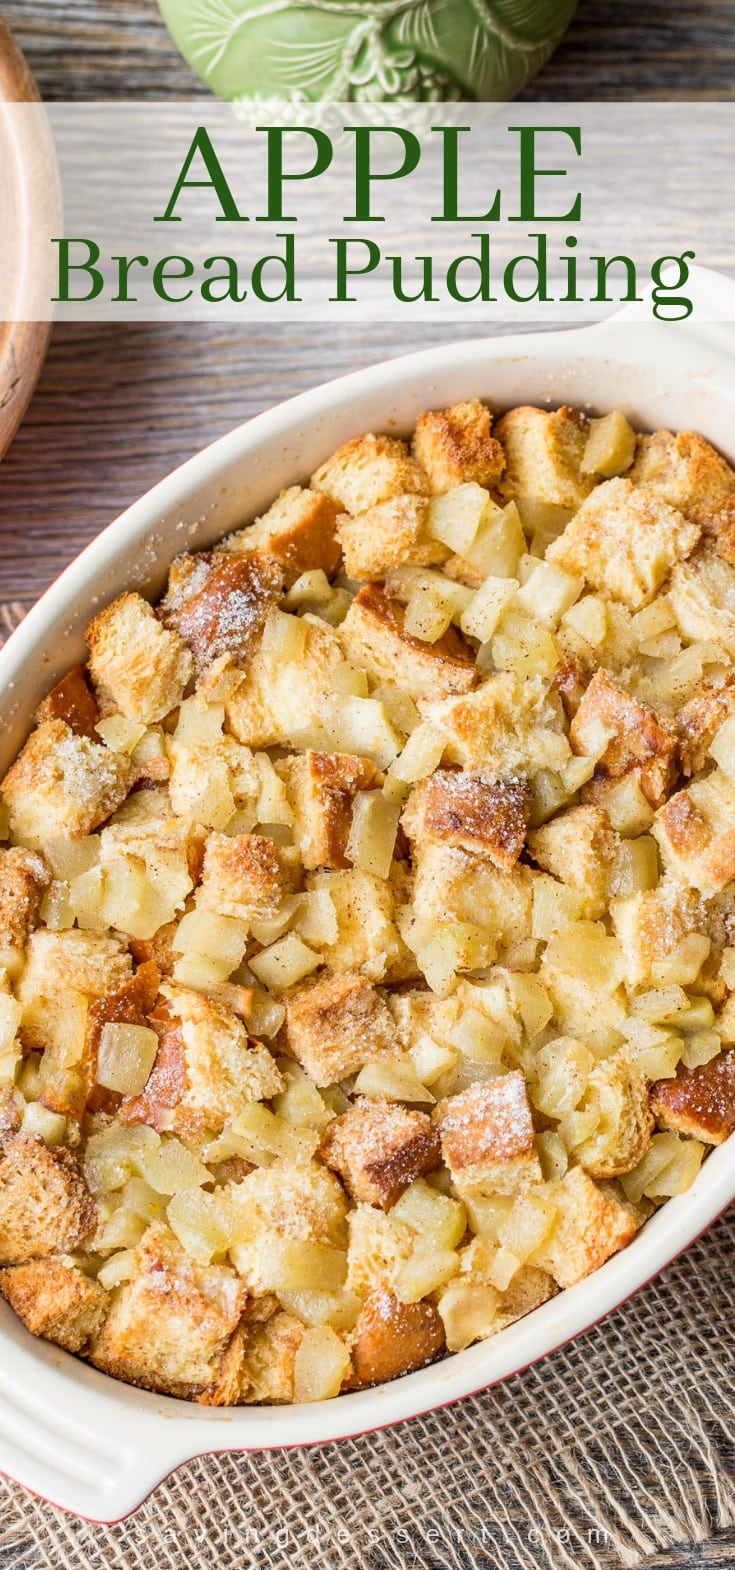 Close up of a casserole dish filled with apple bread pudding